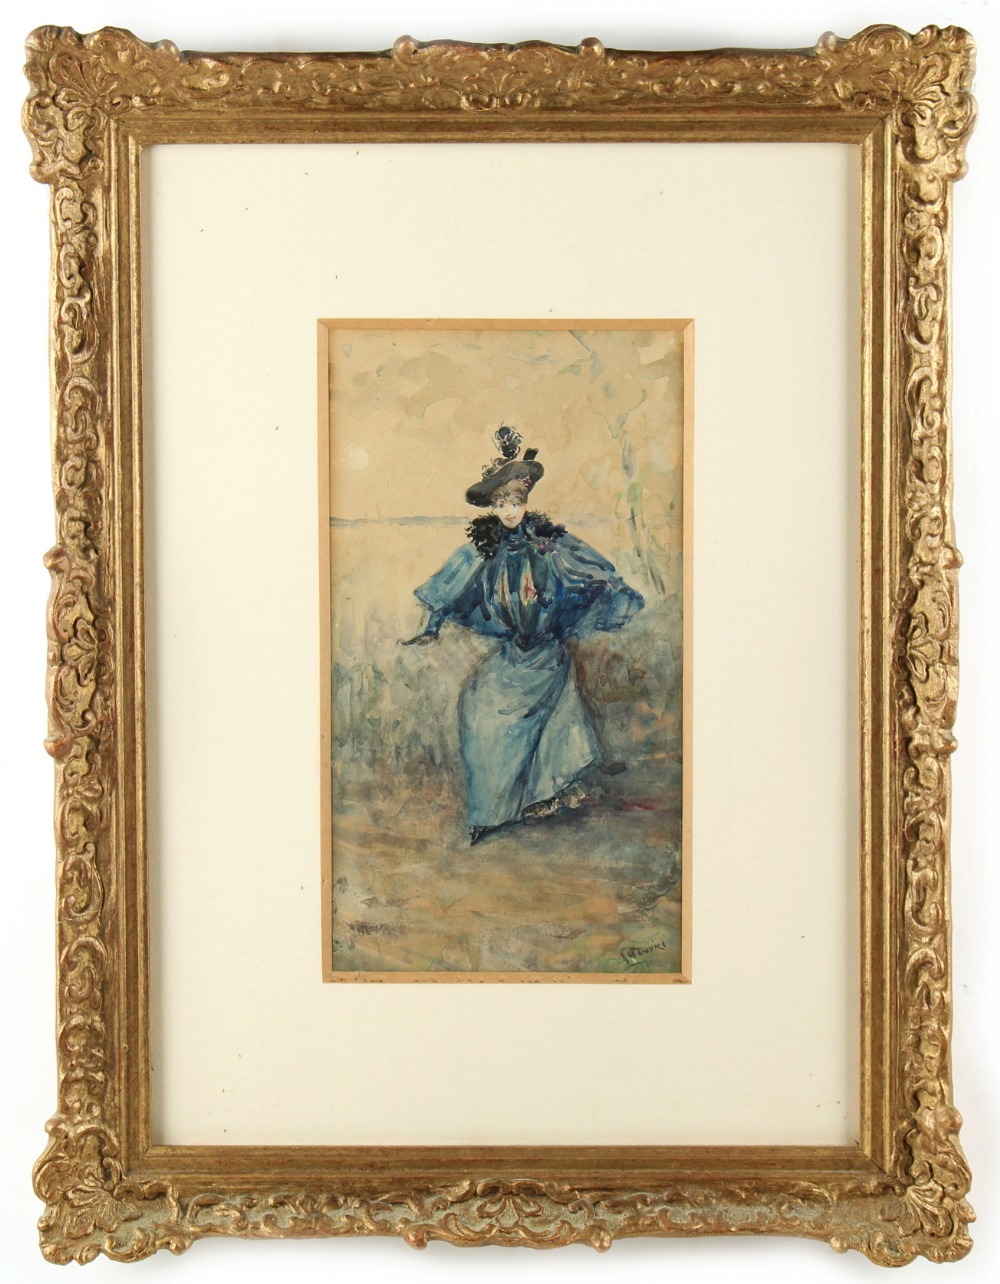 Property of a gentleman - Albert Ludovici Jnr (1852-1932) - LADY IN BLUE DRESS - watercolour, 9.85